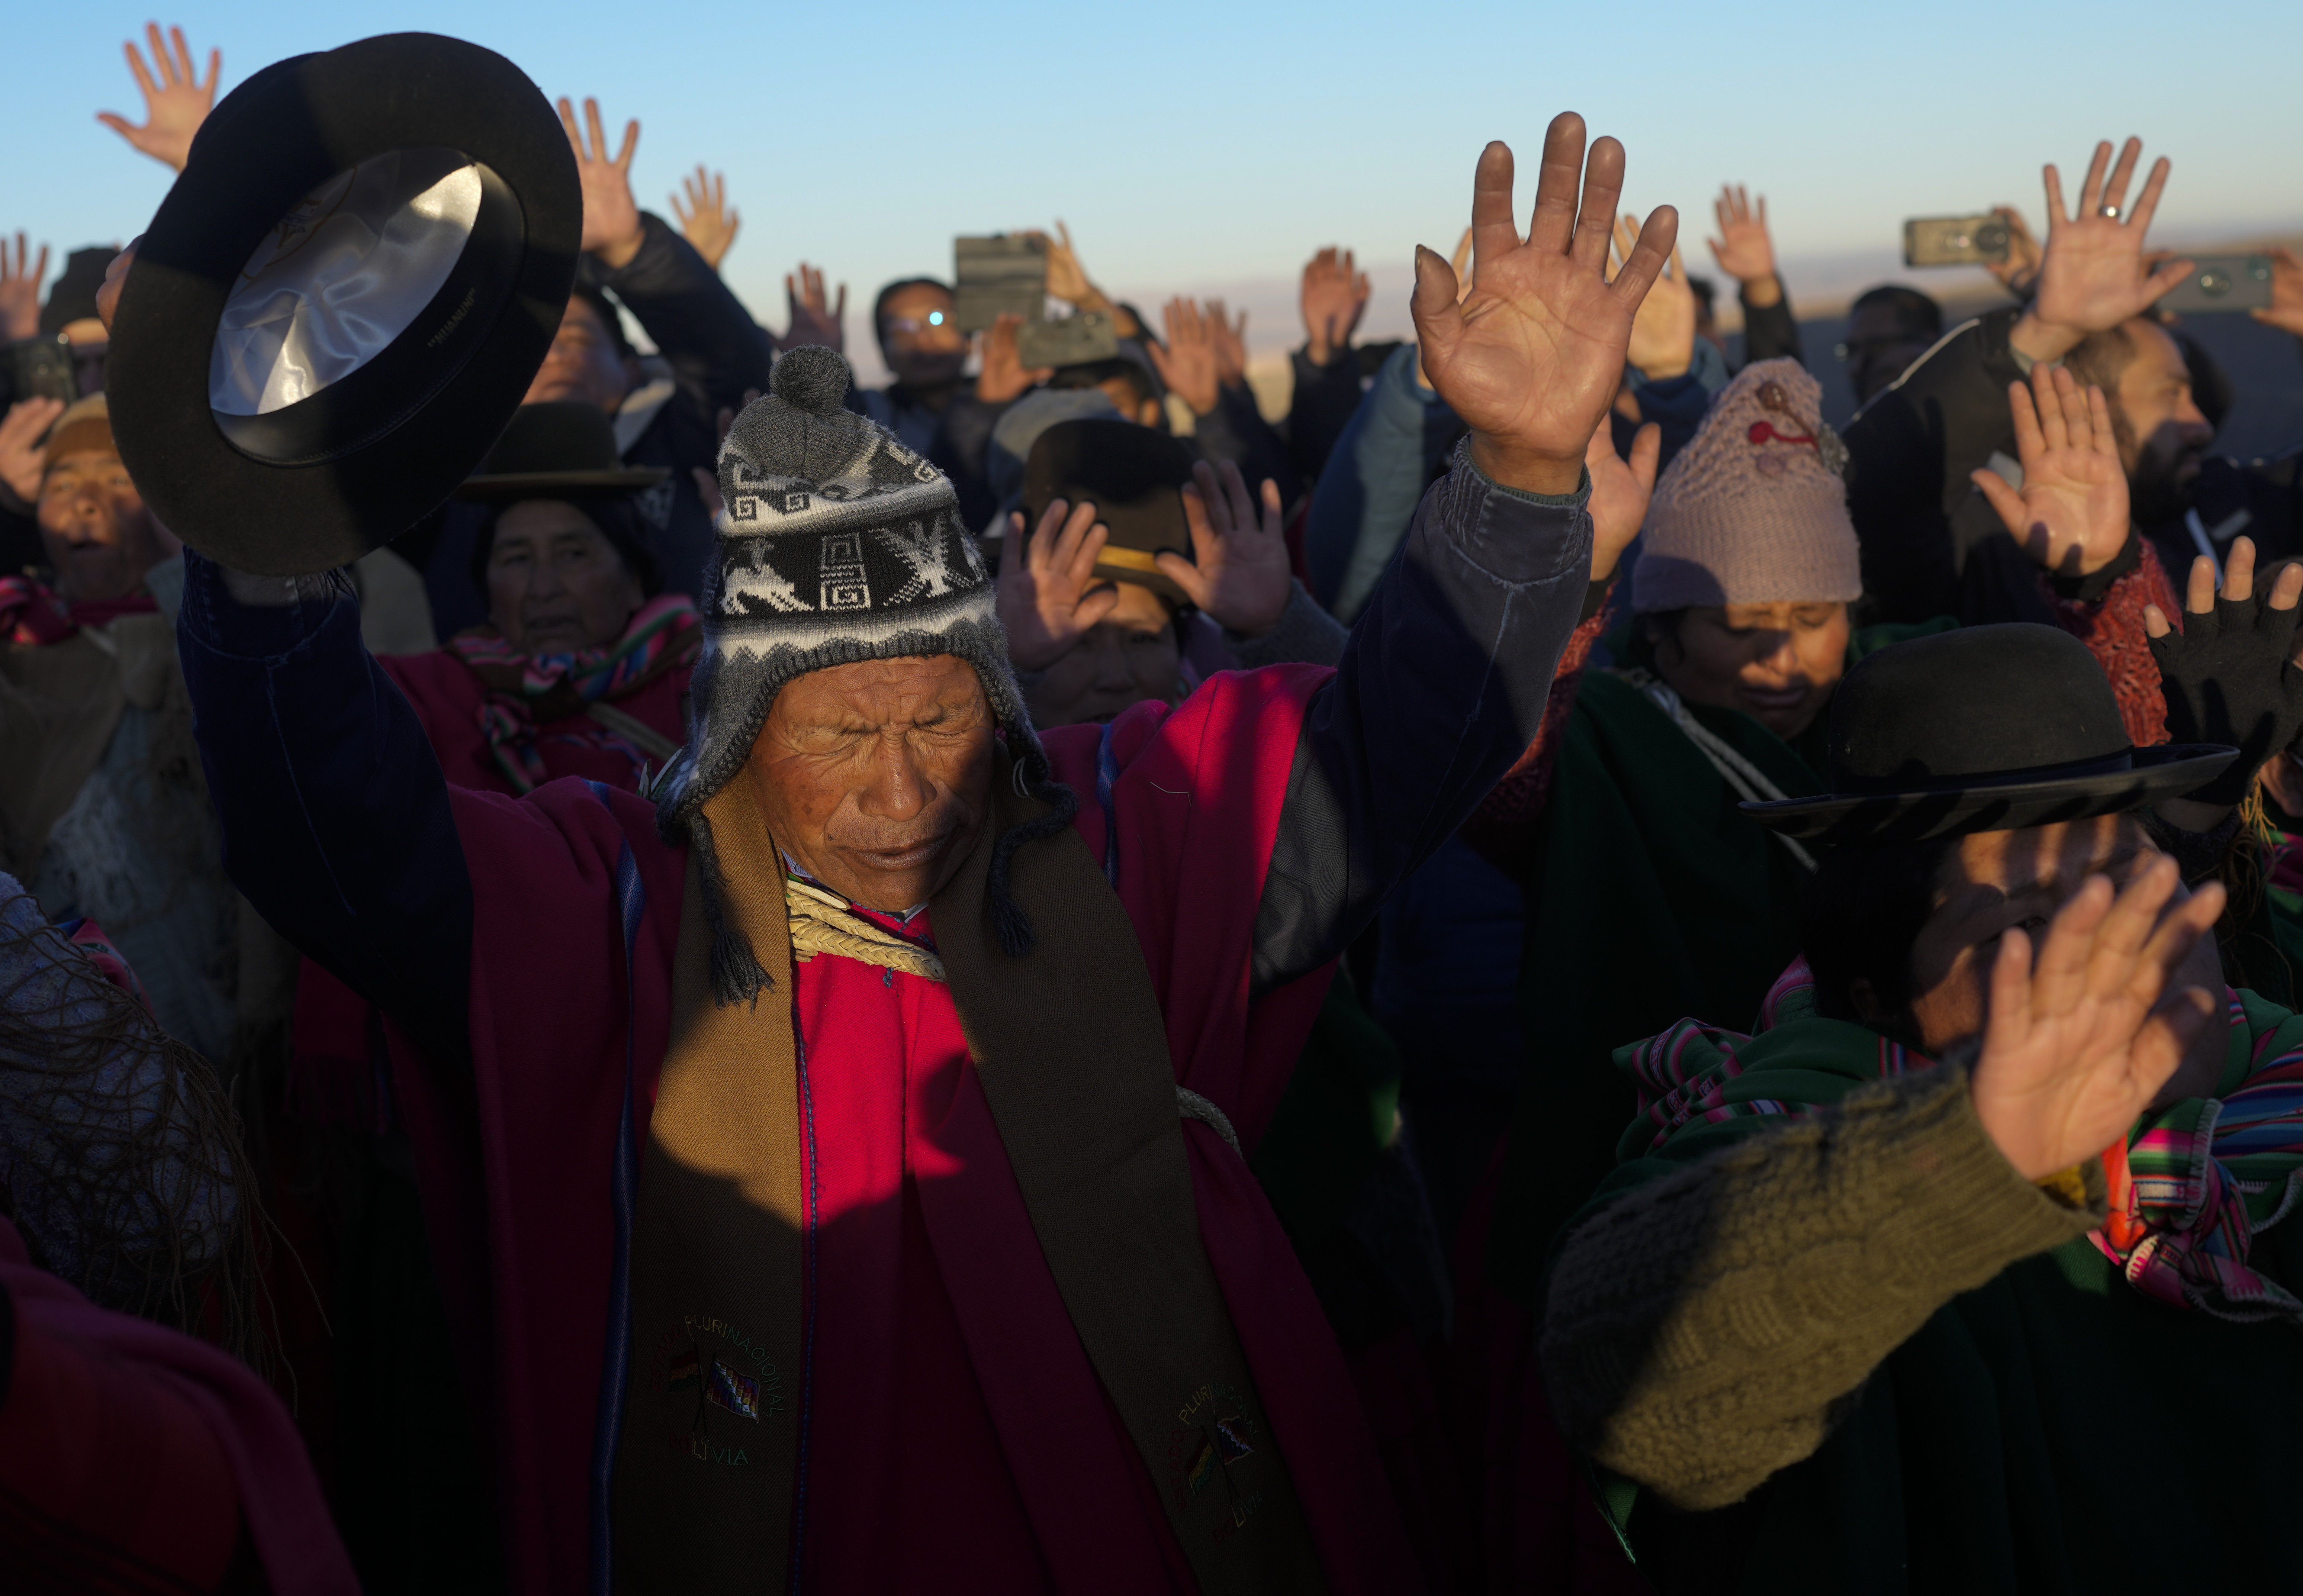 Aymara Indigenous people receive the first rays of sunlight in a New Year's ritual on the sacred mountain Apacheta Murmutani on the outskirts of Hampaturi, Bolivia, early Wednesday, June 21, 2023. Aymara Indigenous communities are celebrating the Andean new year 5,531 or 